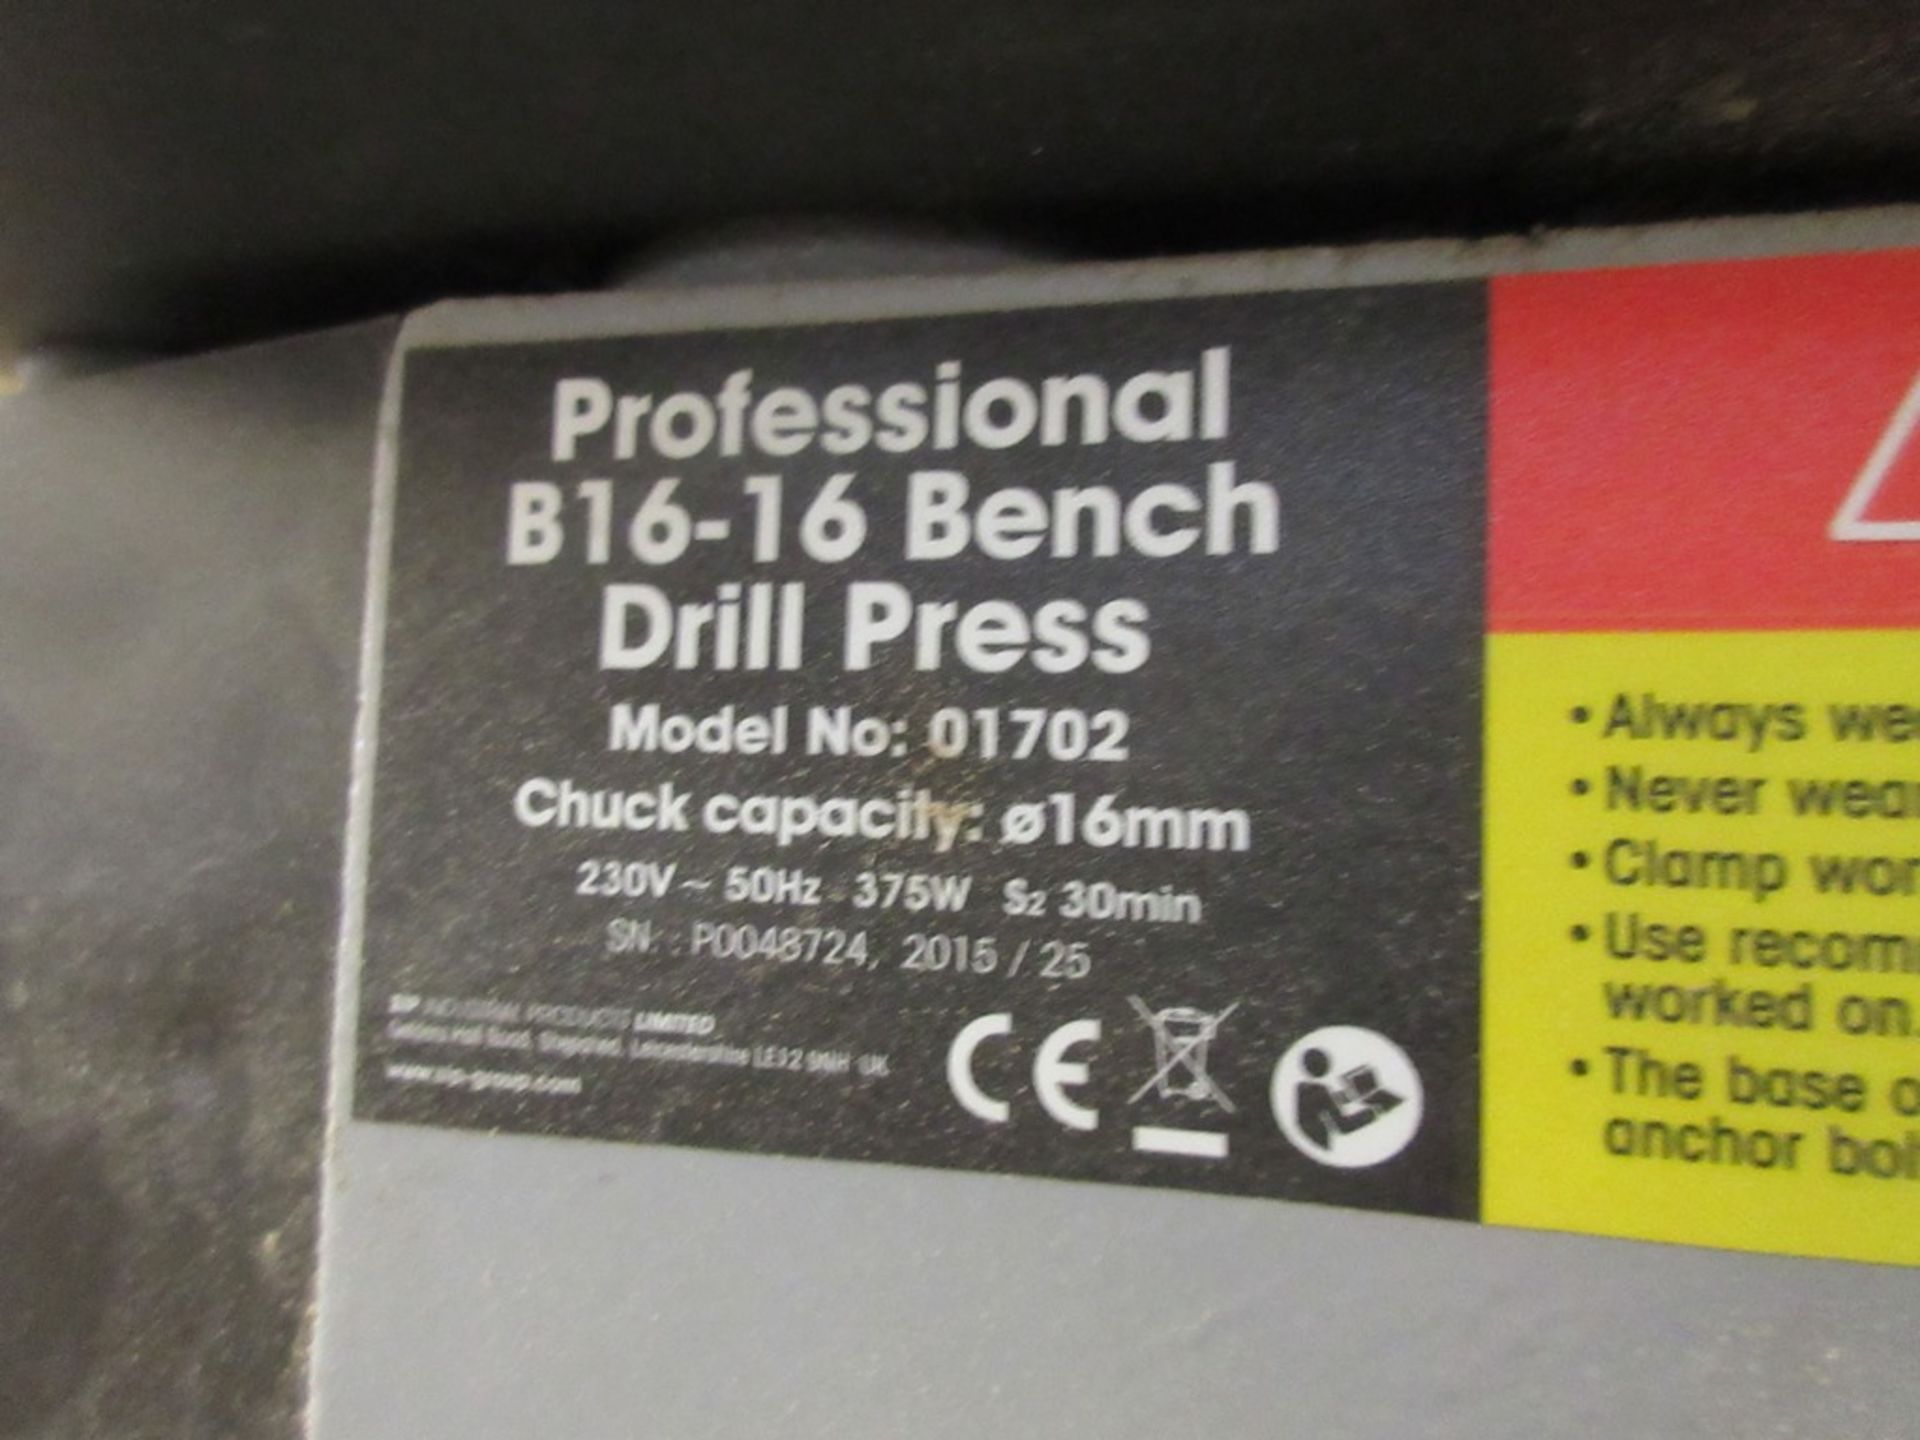 SIP Professional B16-6 bench drill, model 01702, serial number: POO48724, rise & fall table ( - Image 3 of 4